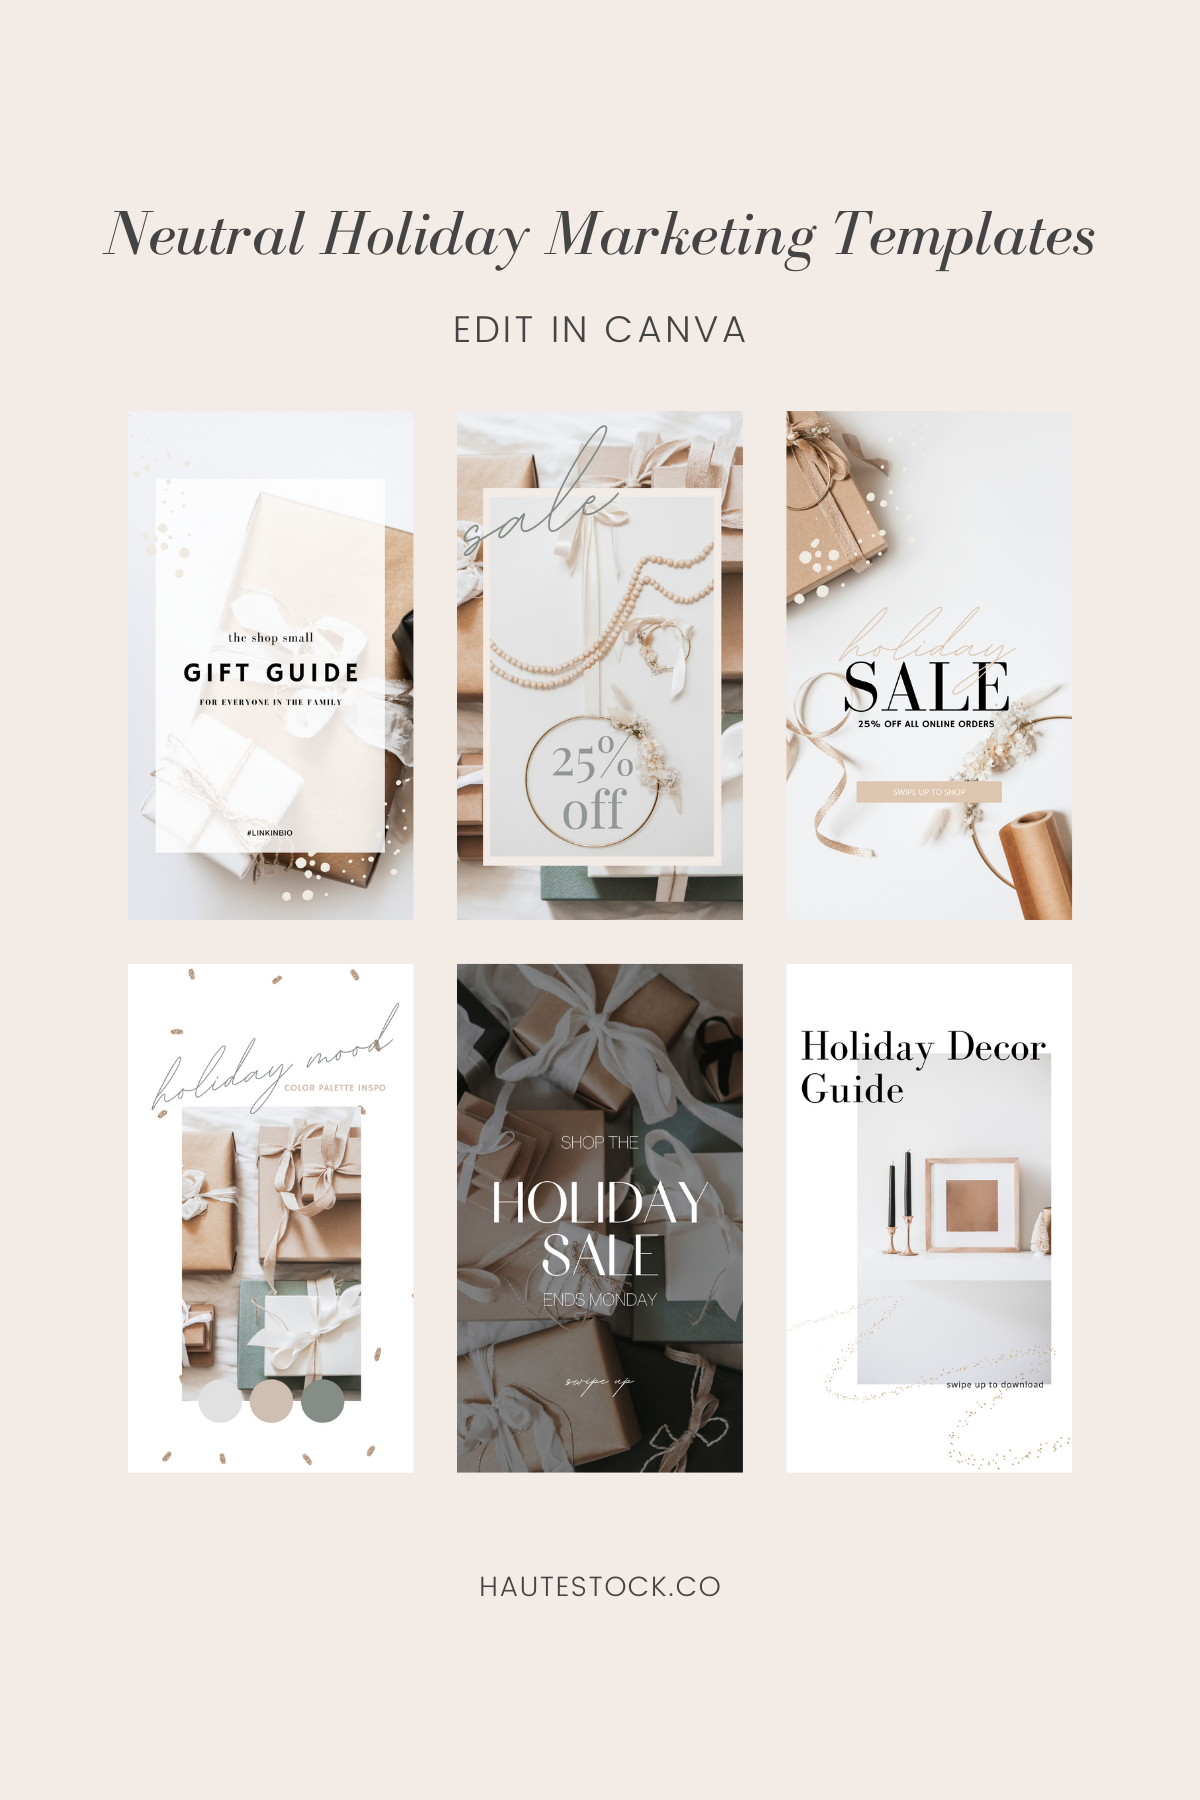 Have holiday promotions you want to market on Instagram? With Haute Stock's Neutral Holiday Marketing Templates you can easily customize the fonts, colors, and images to suit your brand. Start with a professionally designed template and then edit to…